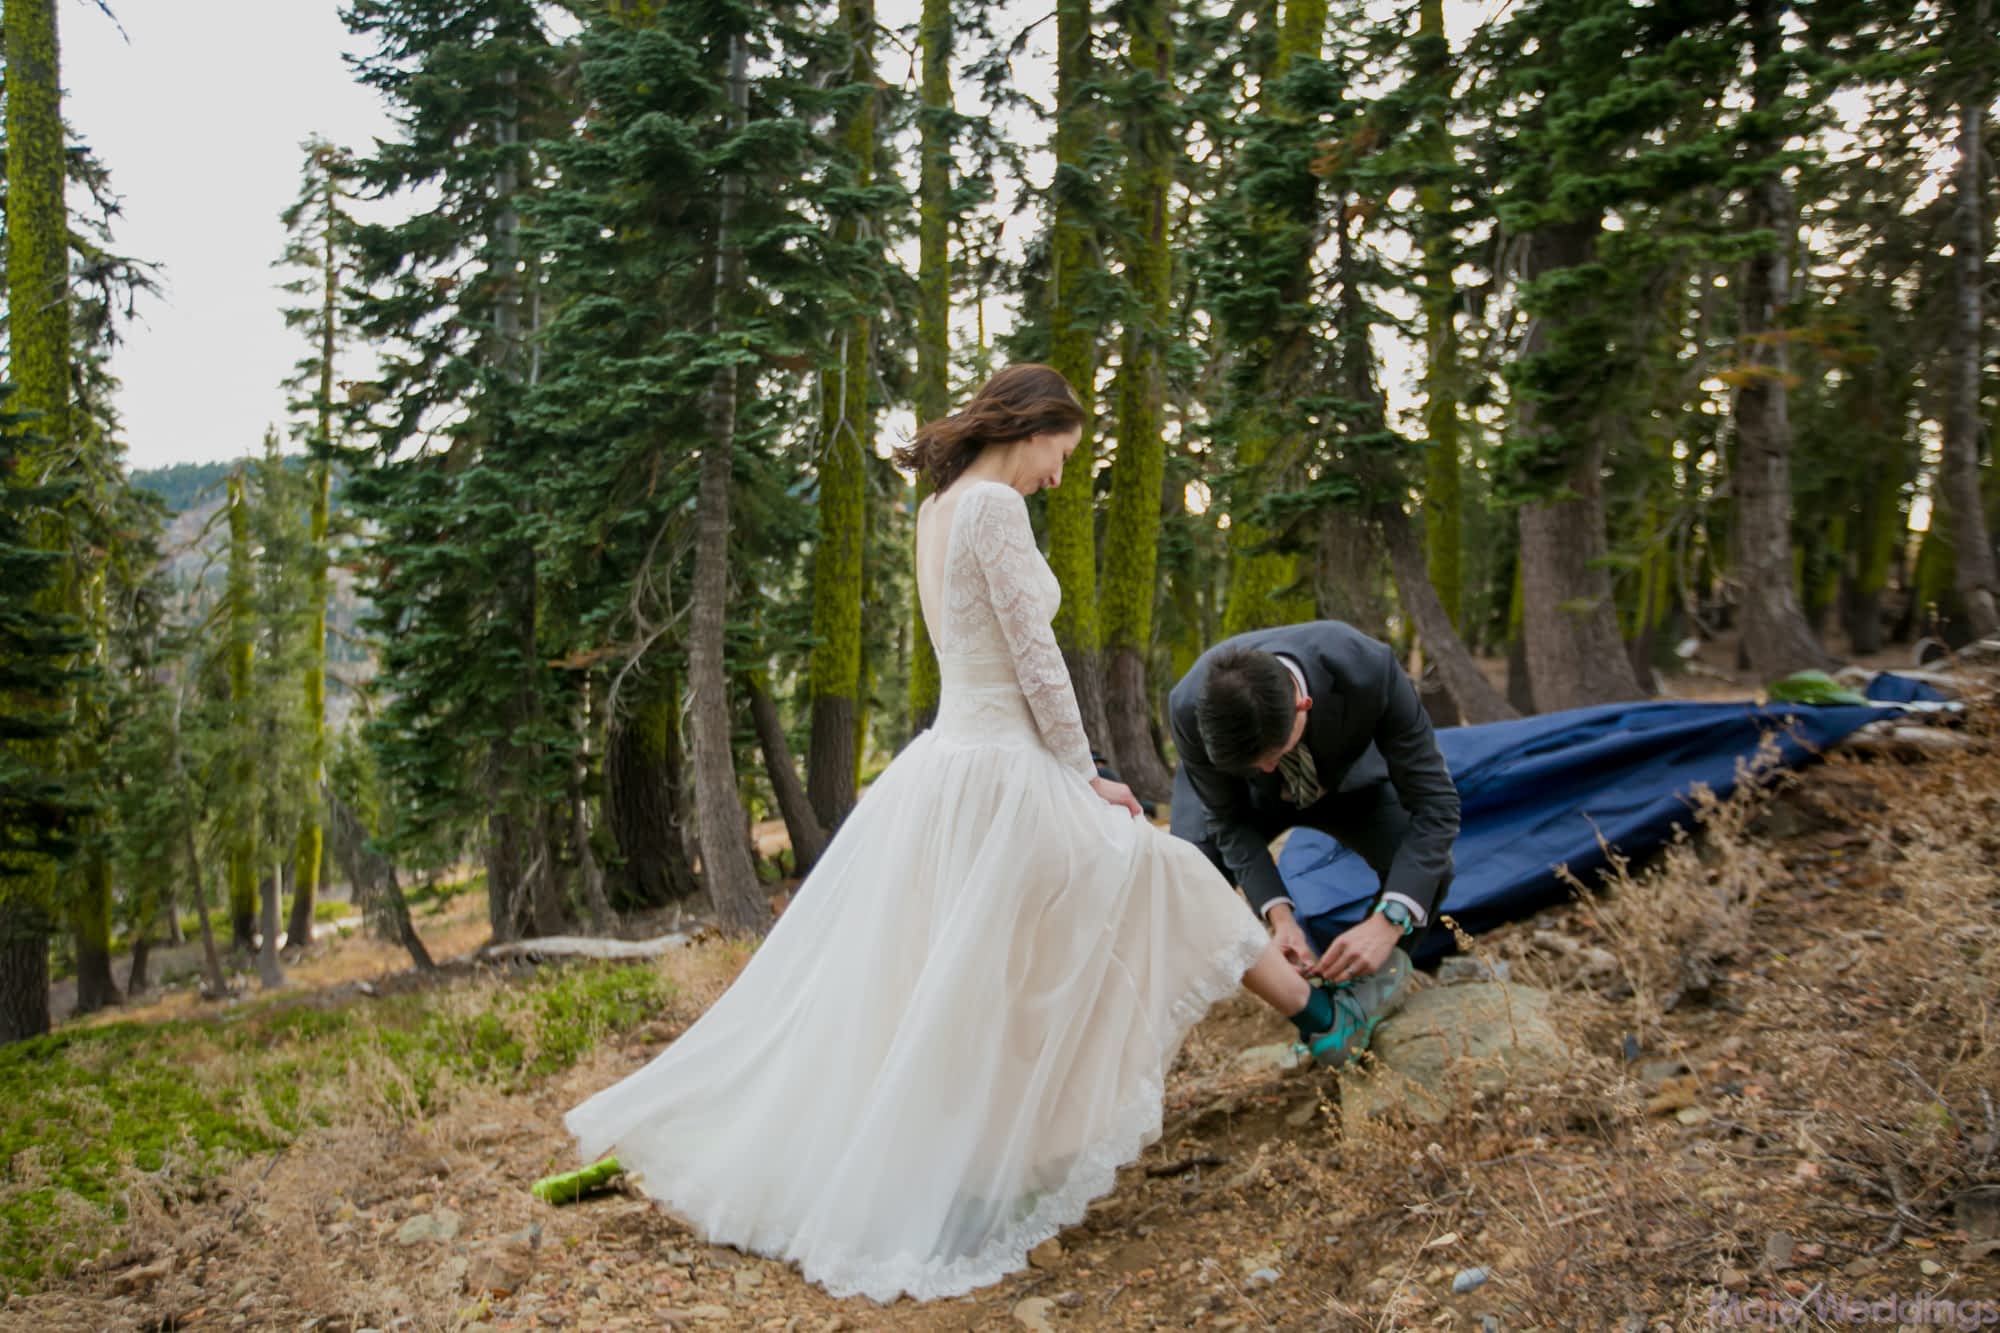 Her white dress fans out white he helps lace up her hiking shoes.